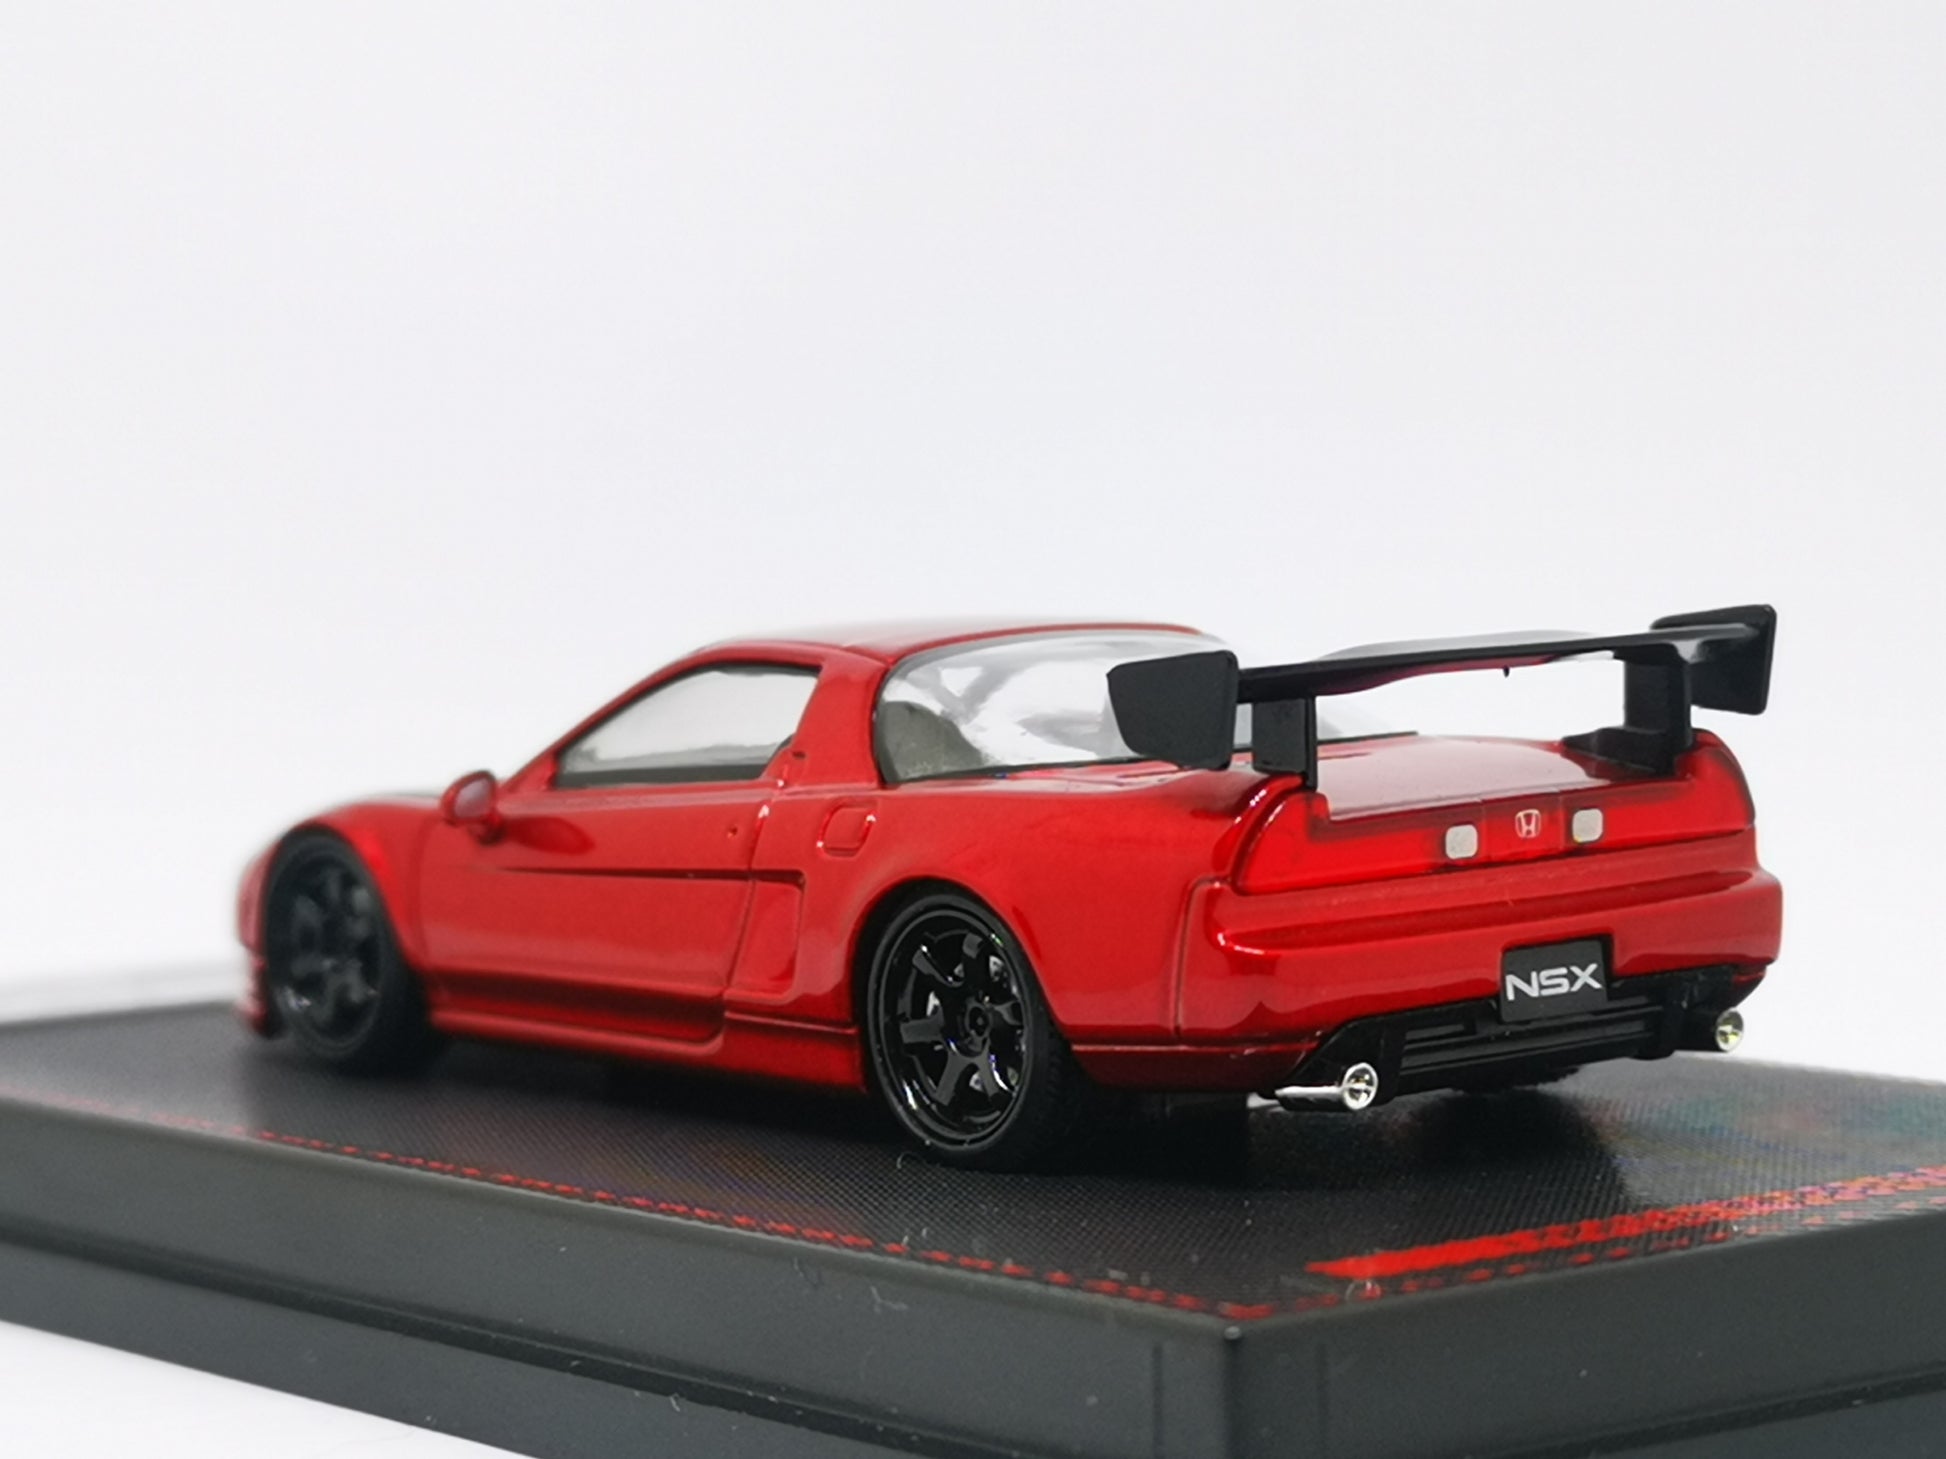 Ignition Model 1:64 Scale Honda NSX NA1 Red Metallic Ignition Mode